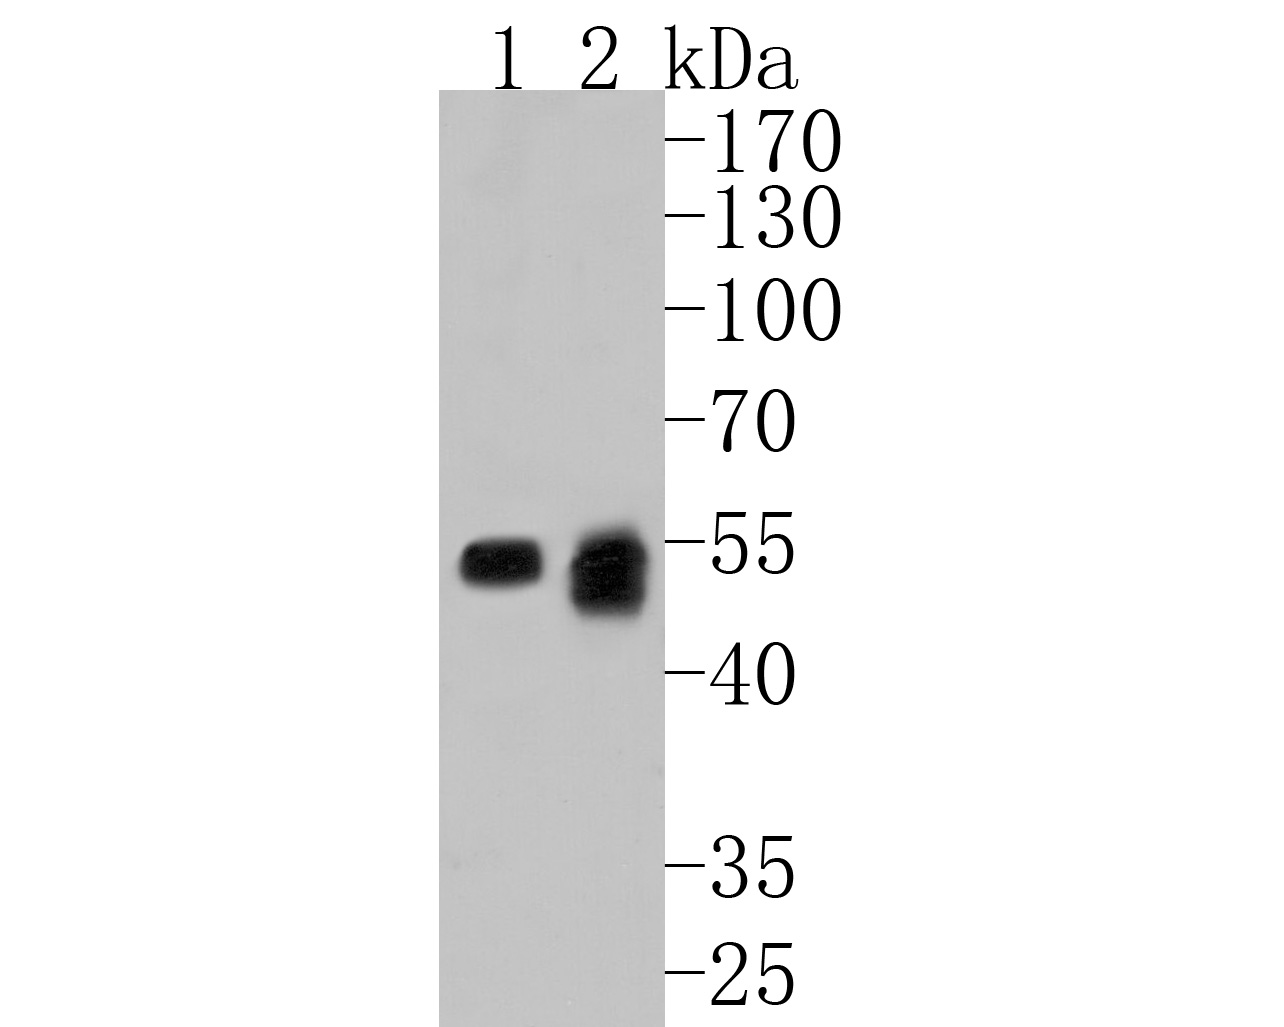 Western blot analysis of Lck on different lysates. Proteins were transferred to a PVDF membrane and blocked with 5% NFDM/TBST for 1 hour at room temperature. The primary antibody (HA500280, 1/1,000) was used in 5% NFDM/TBST at room temperature for 2 hours. Goat Anti-Rabbit IgG - HRP Secondary Antibody (HA1001) at 1:200,000 dilution was used for 1 hour at room temperature.<br />
Positive control: <br />
Lane 1: Rat thymus tissue lysate<br />
Lane 2: Jurkat cell lysate